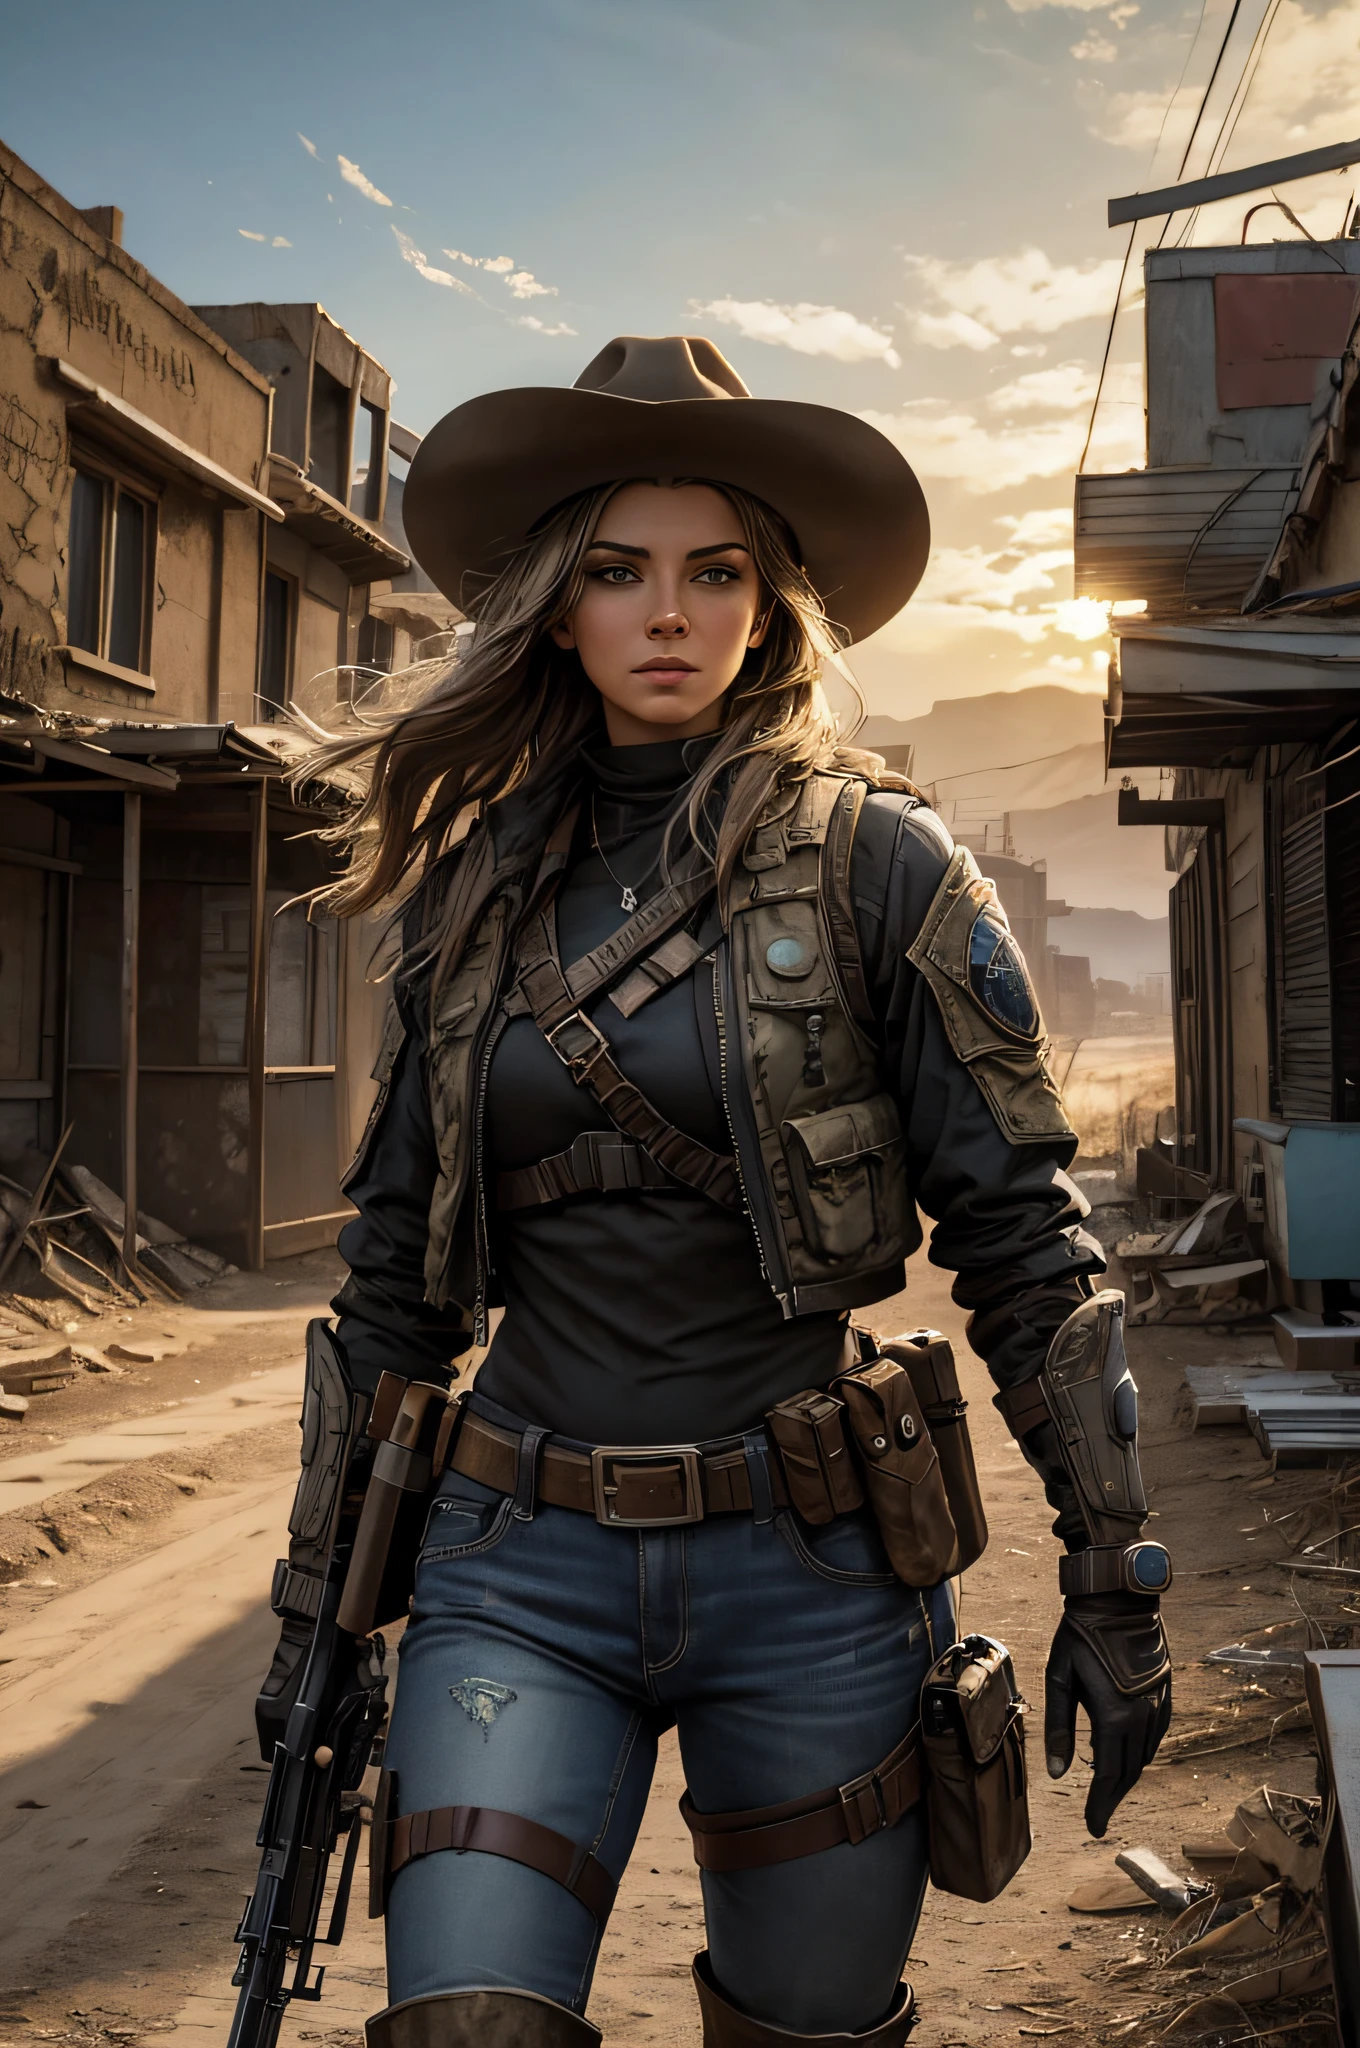 Create a cinematic, filmic image ((best quality)), ((masterpiece)), ((realistic)) of [post nuclear town] in [fallout style], with [detailed linework], [dynamic shading], and [rich colors]. Show [young caucasian woman] [Desert Ranger] named [AnjelikaV2:1.5] and her [full body], with [expressive facial features] and [fluid body movements], and close attention paid to [costume design] and [background details]. The art style should capture the [post-apocalyptic setting] of the image.
Create an [ultra-realistic], [high-resolution] image of [soldier] [mercenary] [exploring] [american] [desolated city] before the [storm], with the [hot summer sun] still shining brightly in the sky, but in the distance, the sky is a [dark and foreboding shade of blue], hinting at an impending storm. [Tumbleweeds] rolling in the distance.
Her face is covered in [dust] with windswept hair cascading [loosely]. Her eyes with [black eyeliner] and [smokey eye shadow] have long, full eyelashes that add to her feminine charm. She wears a [bandolier], [uzipped] [rugged black leather armor] showing her [cleavage] and [tactical vest:1.2], [old jeans] accentuating her [slim body] and [black wide-brimmed cowboy hat] with metal [texas ranger star], [knee pads] and [short leather boots] that provide both style and function and [holding weapon], [holding gun], [assault rifle:1.2].
Aim for a [photorealistic] portrayal that captures the [essence] of her character, with [intricate details] that capture every nuance of her form. The overall mood of the image should be [post nuclear], [post-apocalyptic], with a sense of [melancholy], [loneliness], and [desolation], showing the complete scene with her [full body]  >